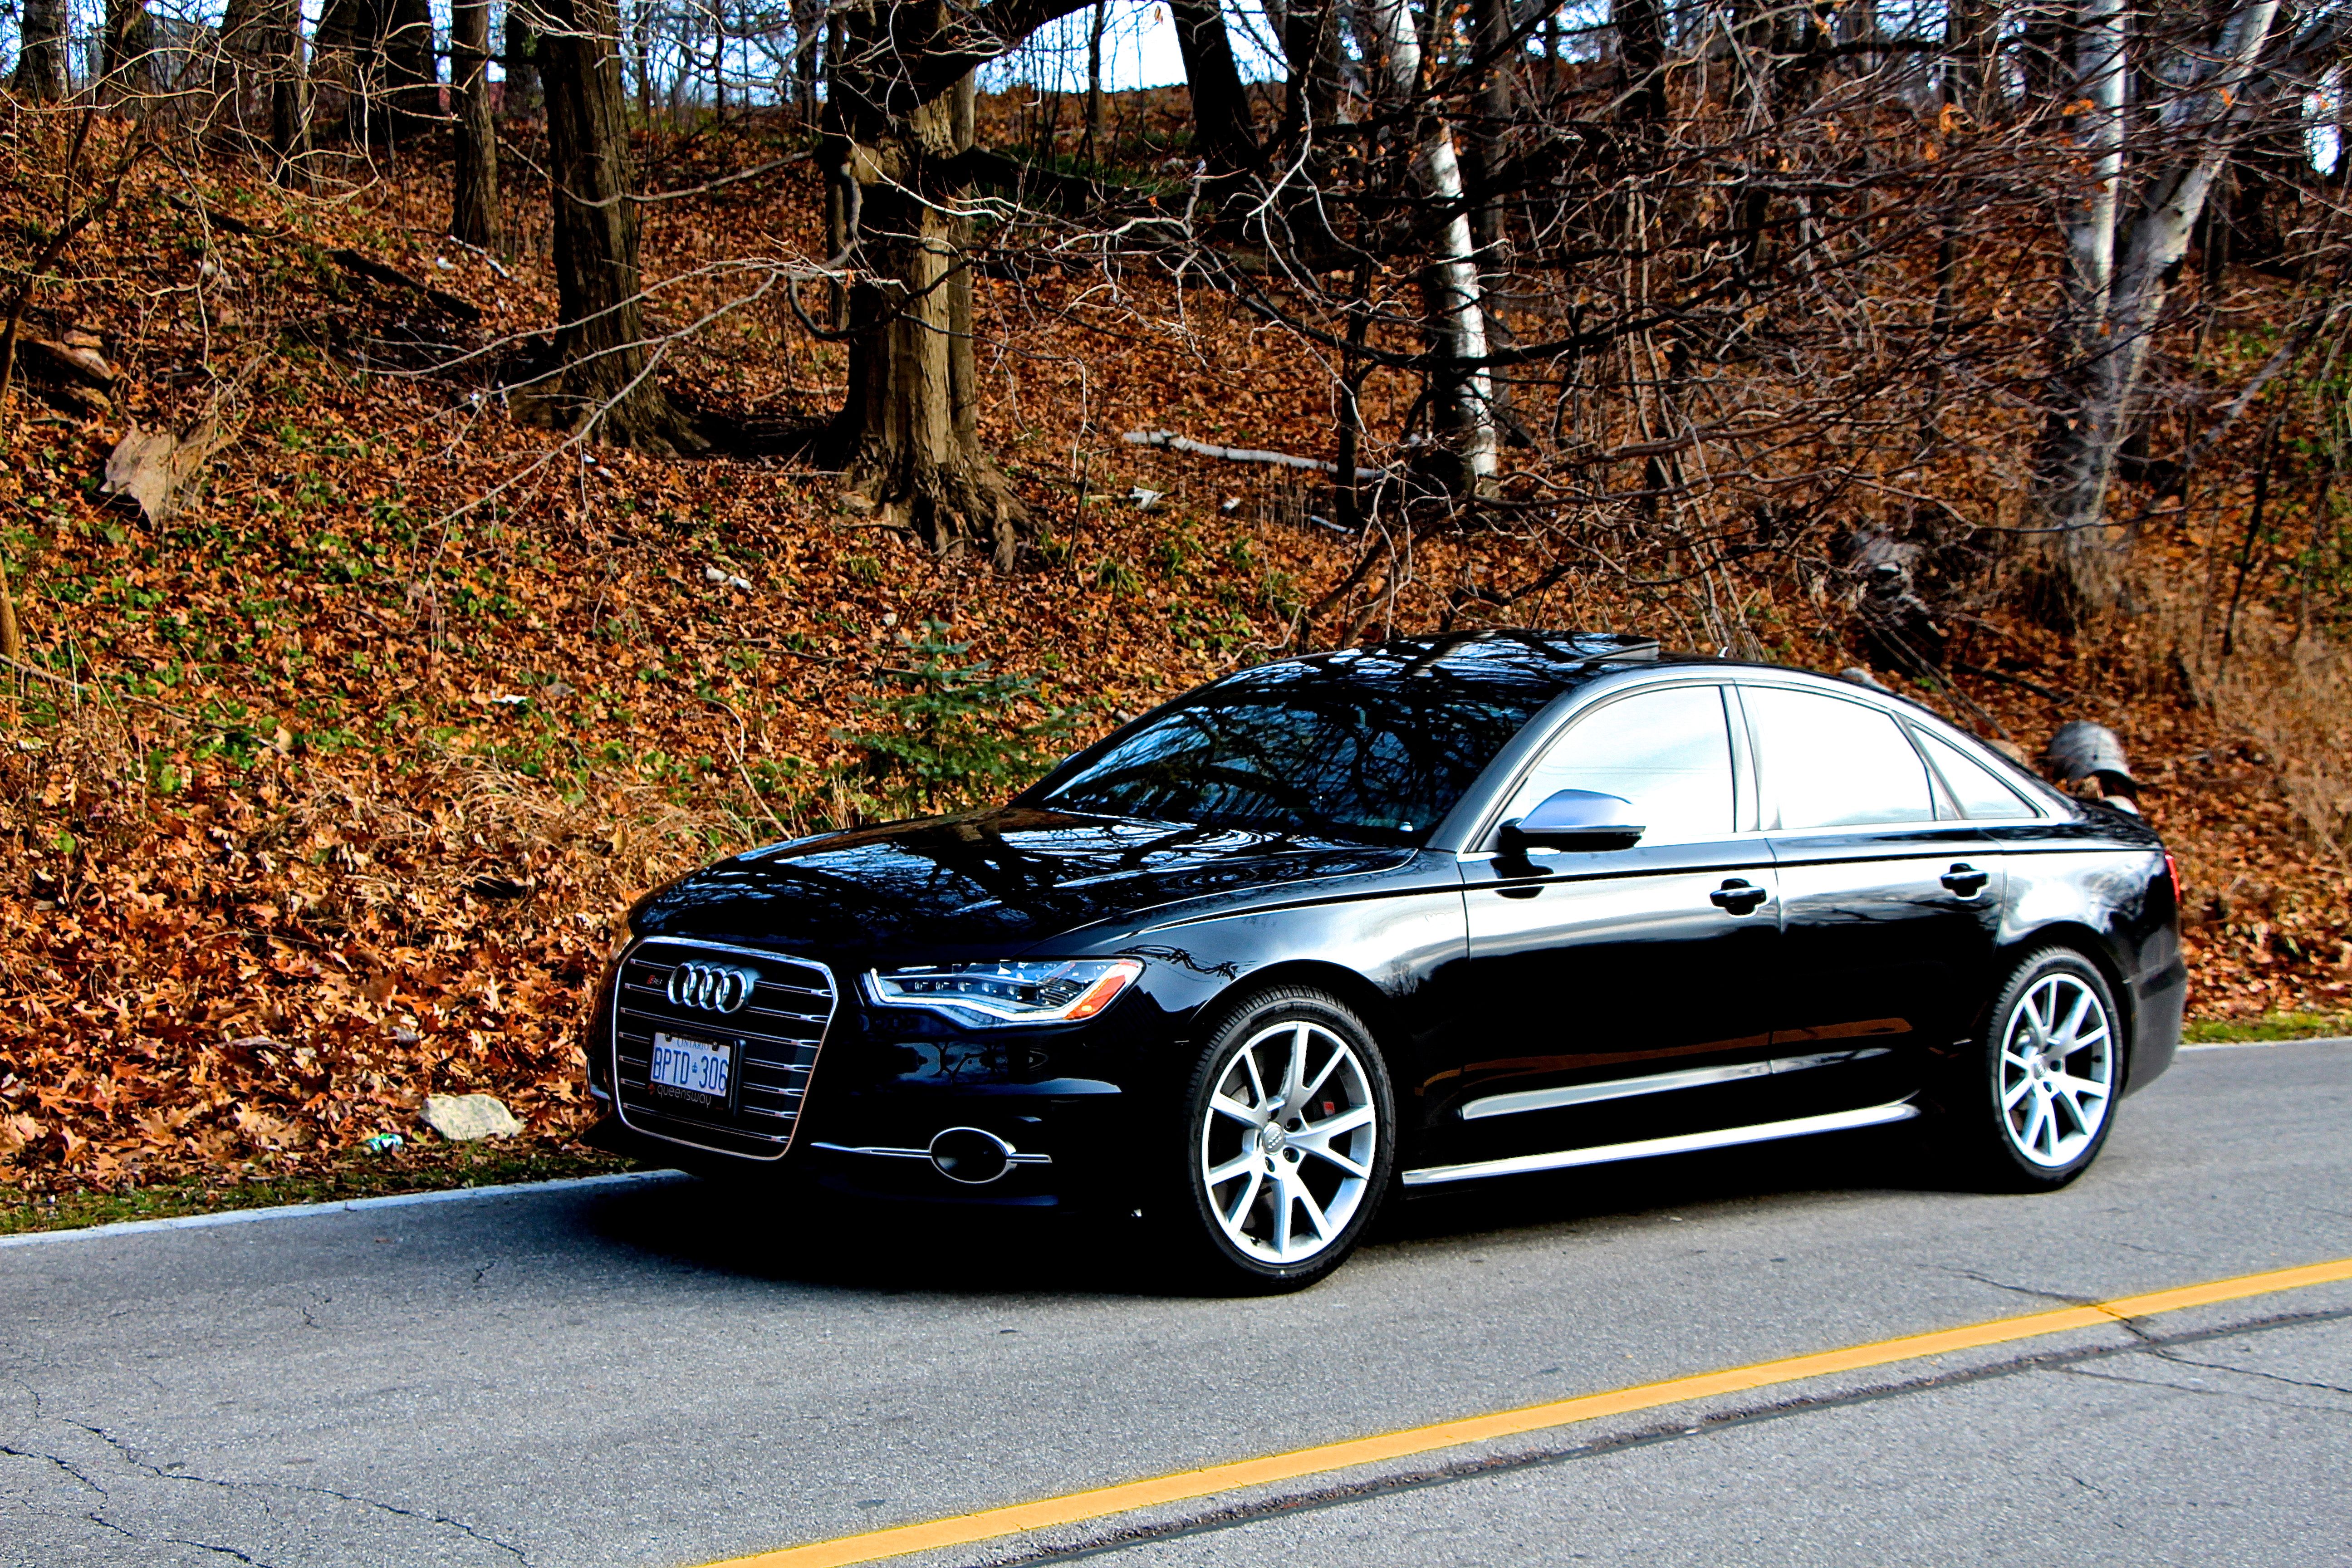 Amazing Audi S6 Pictures & Backgrounds